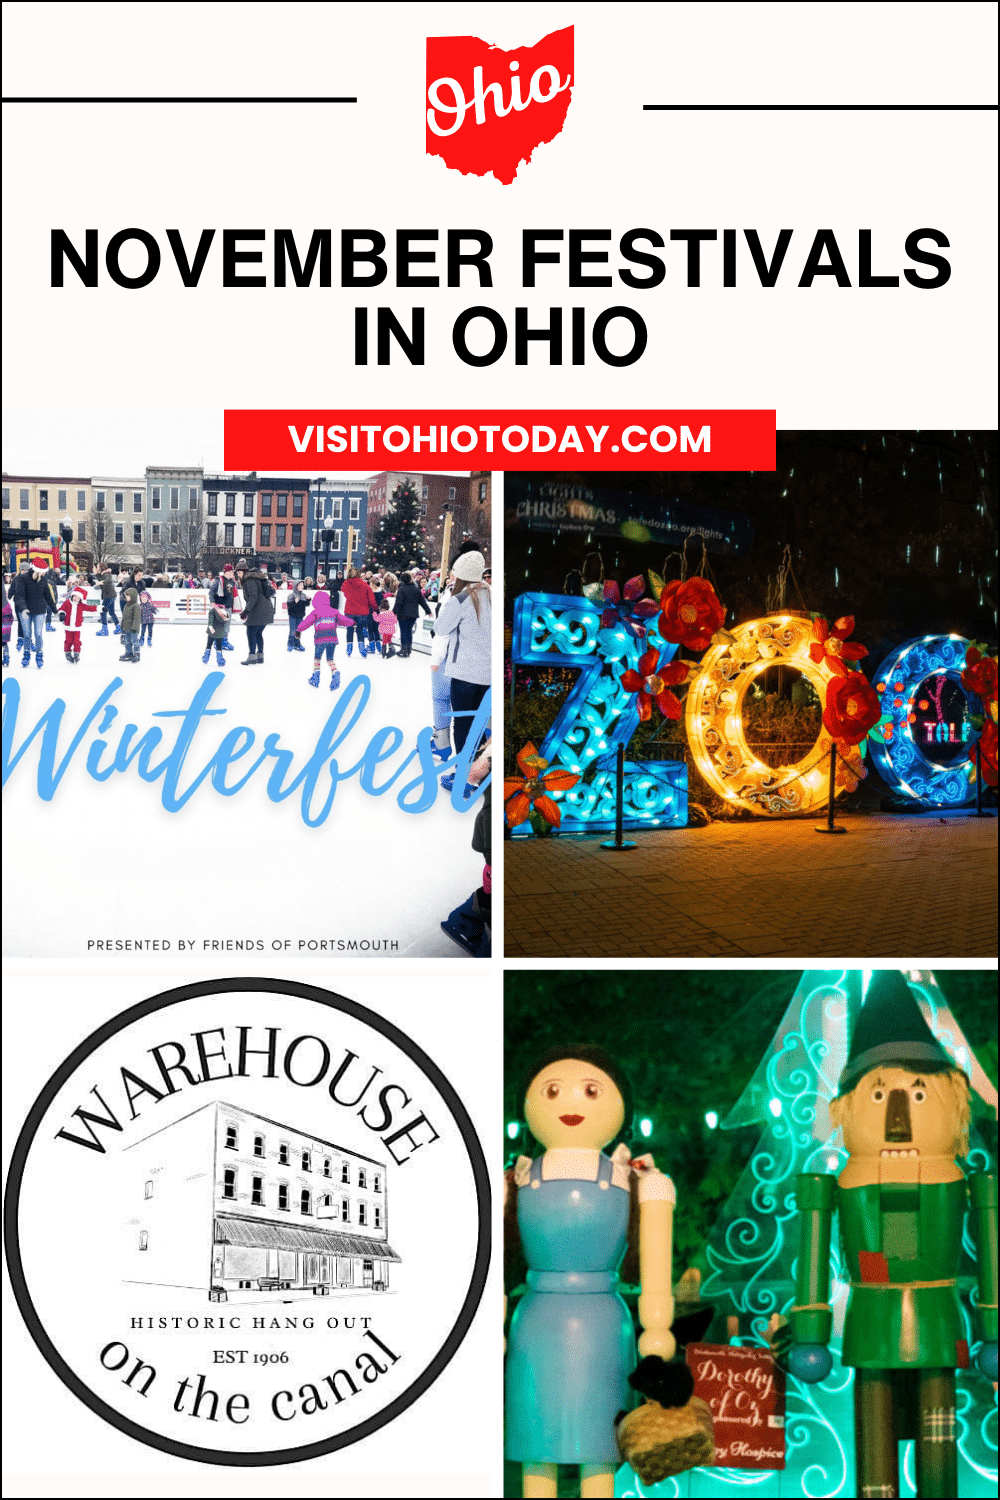 Are you in the spirit of the holiday season yet? This list of November Festivals in Ohio will give you some ideas for ways to celebrate!